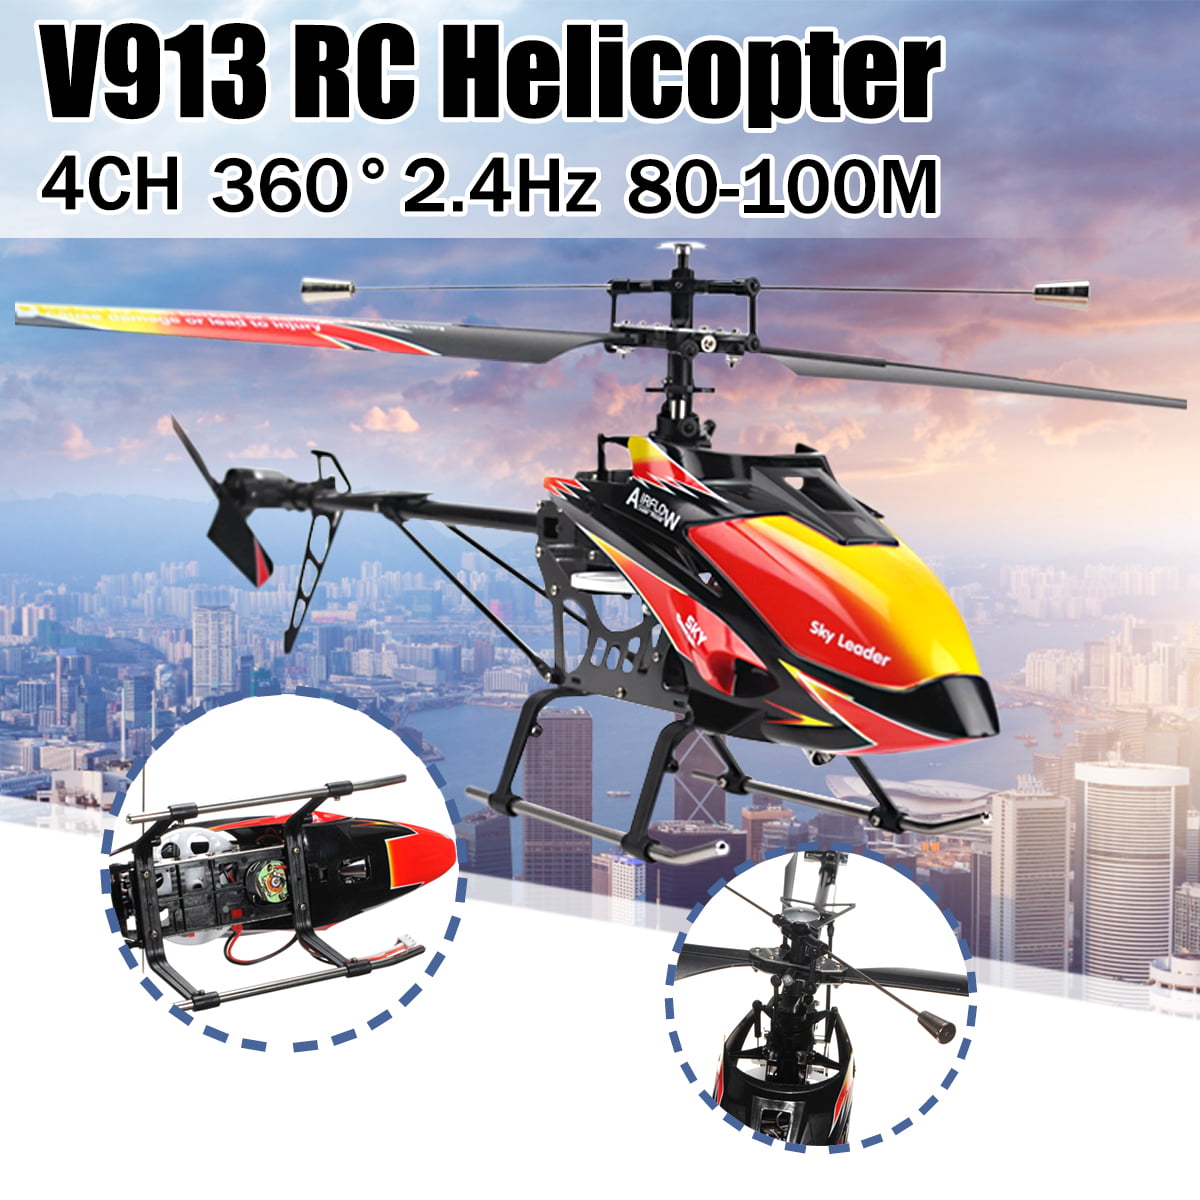 remote control helicopter walmart